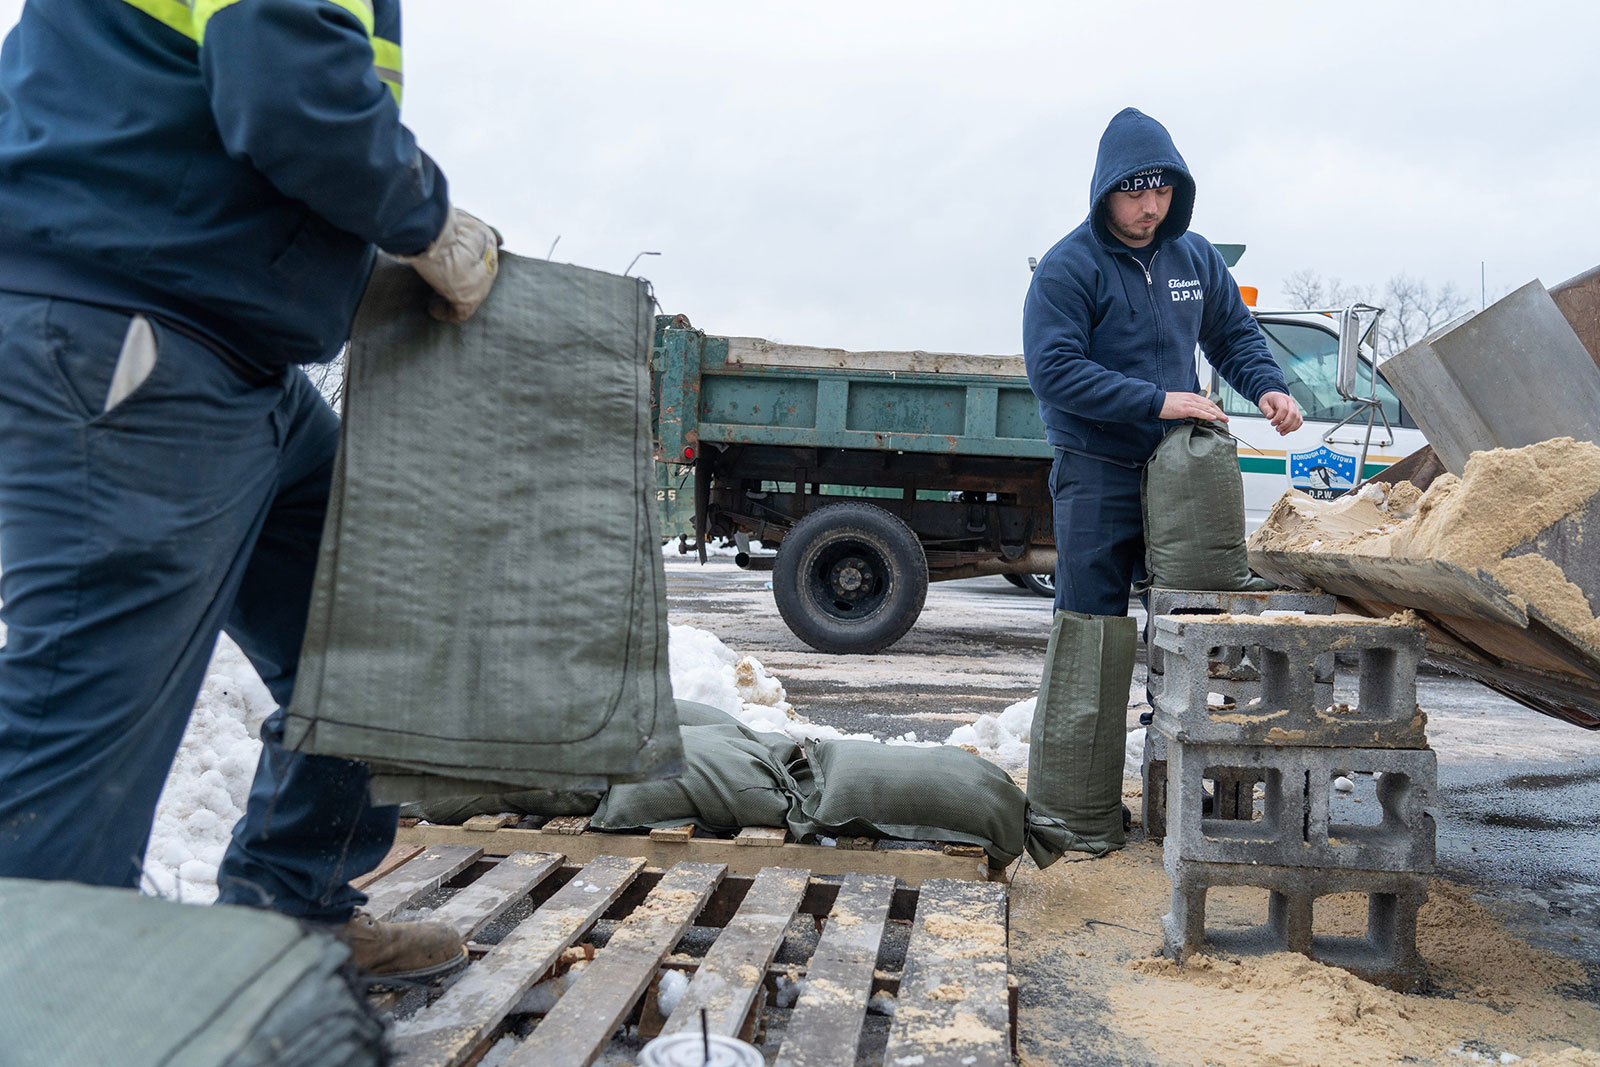 Totowa DPW workers from right, Brian Henderson and Josko Huljev, fill sandbags for residents of the township in Totowa, New Jersey, on Tuesday.